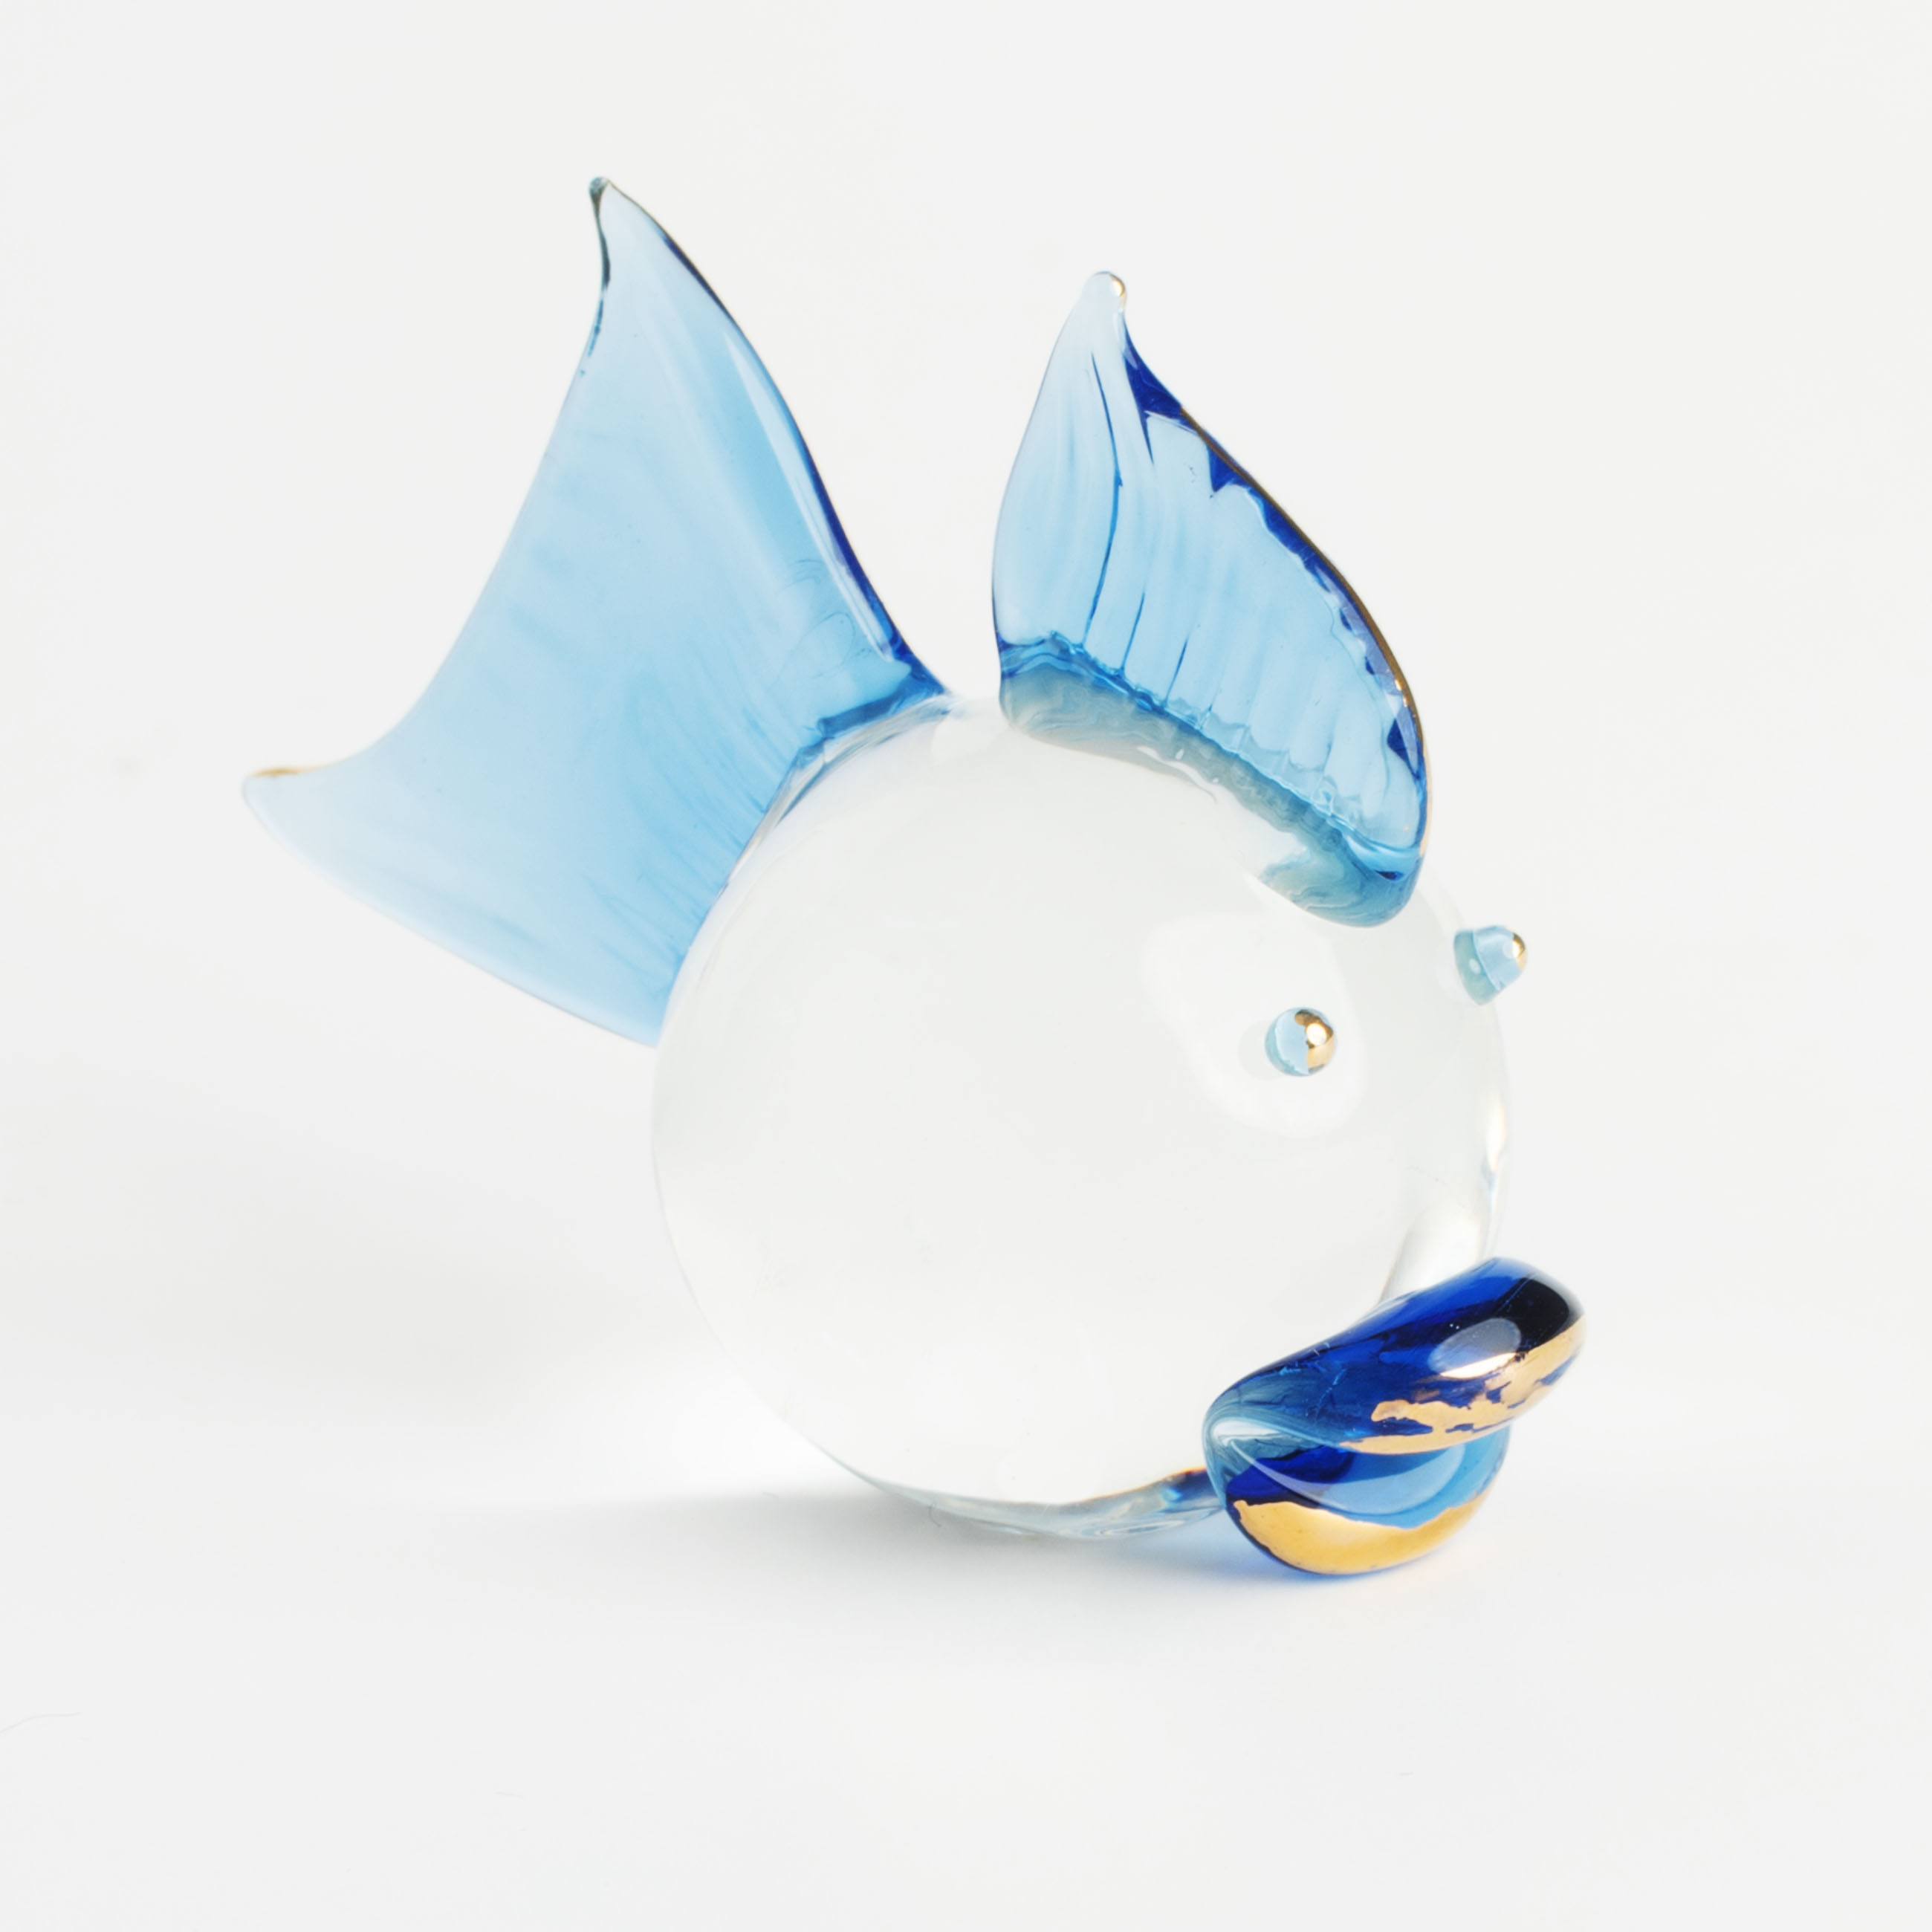 Statuette, 5 cm, glass, Fish with blue fin and tail, Vitreous изображение № 4